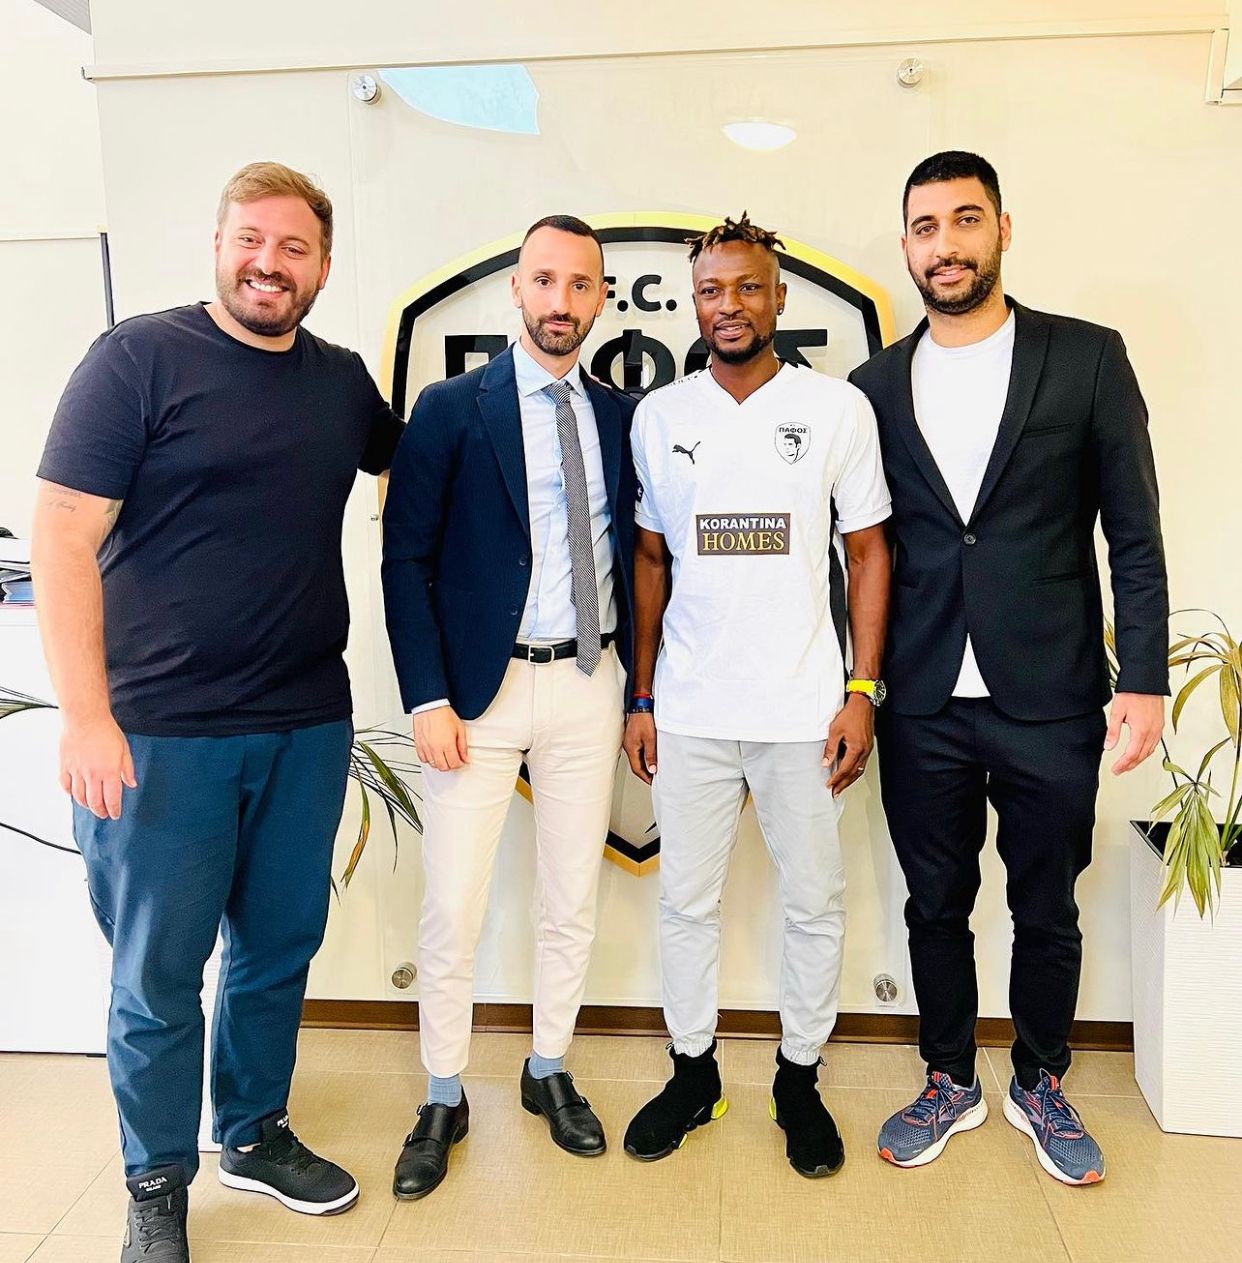 I'm excited to join Pafos FC - Ghana forward Patrick Twumasi